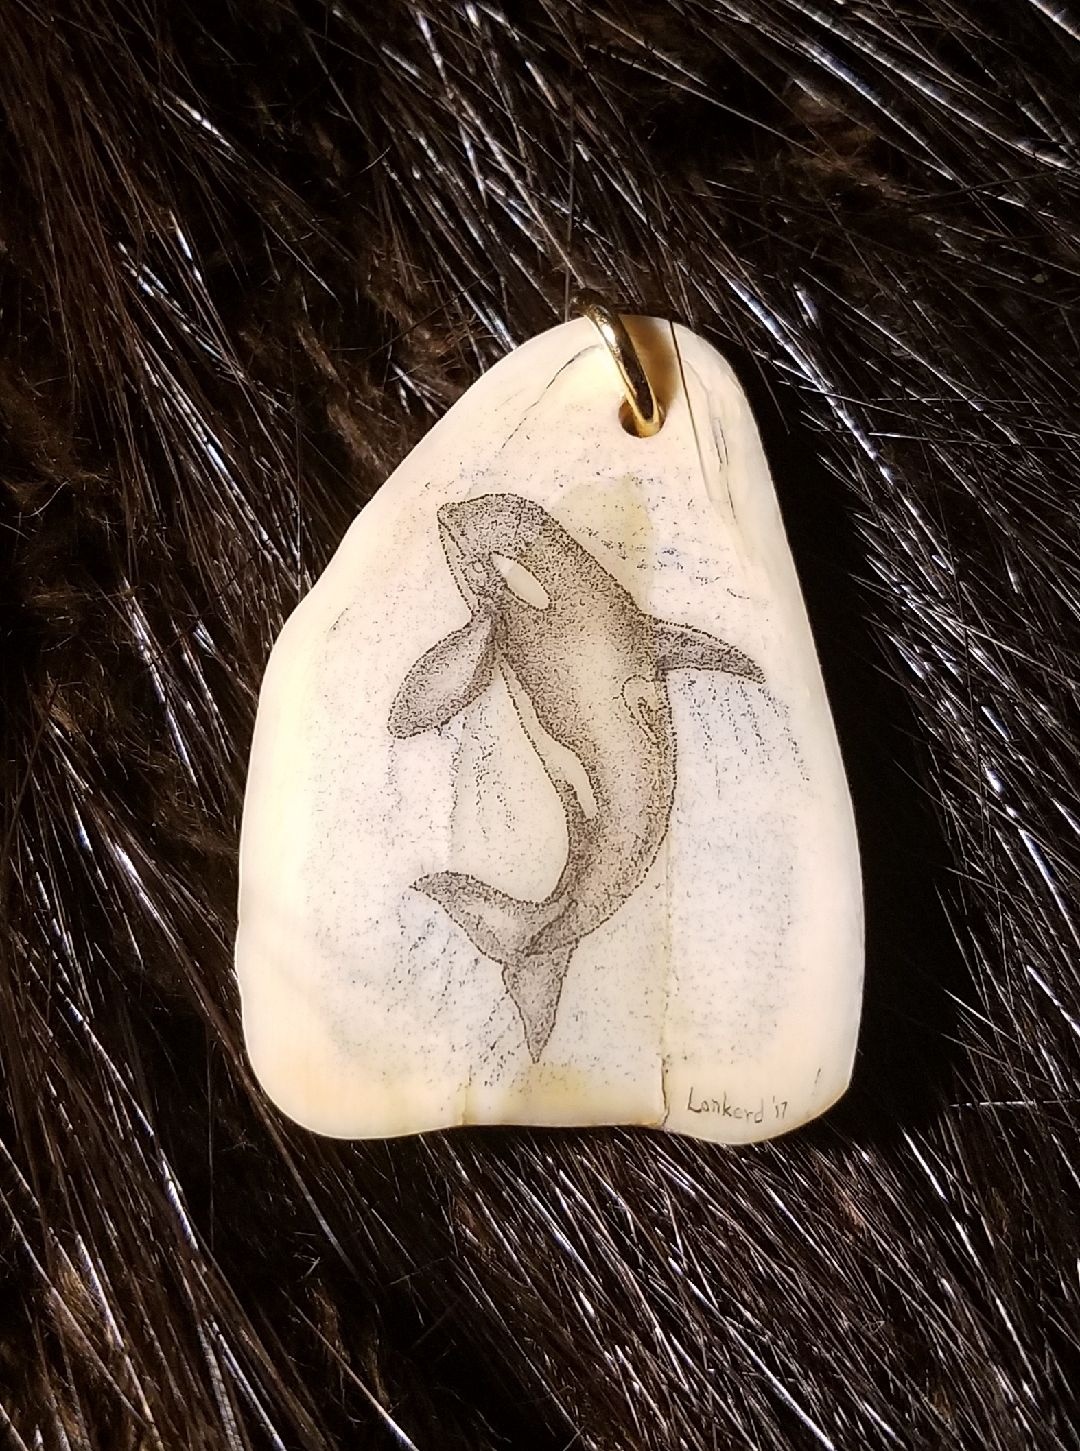 Killer Whale Scrim on Fossilized Walrus Tooth necklace, no chain...  $80.00